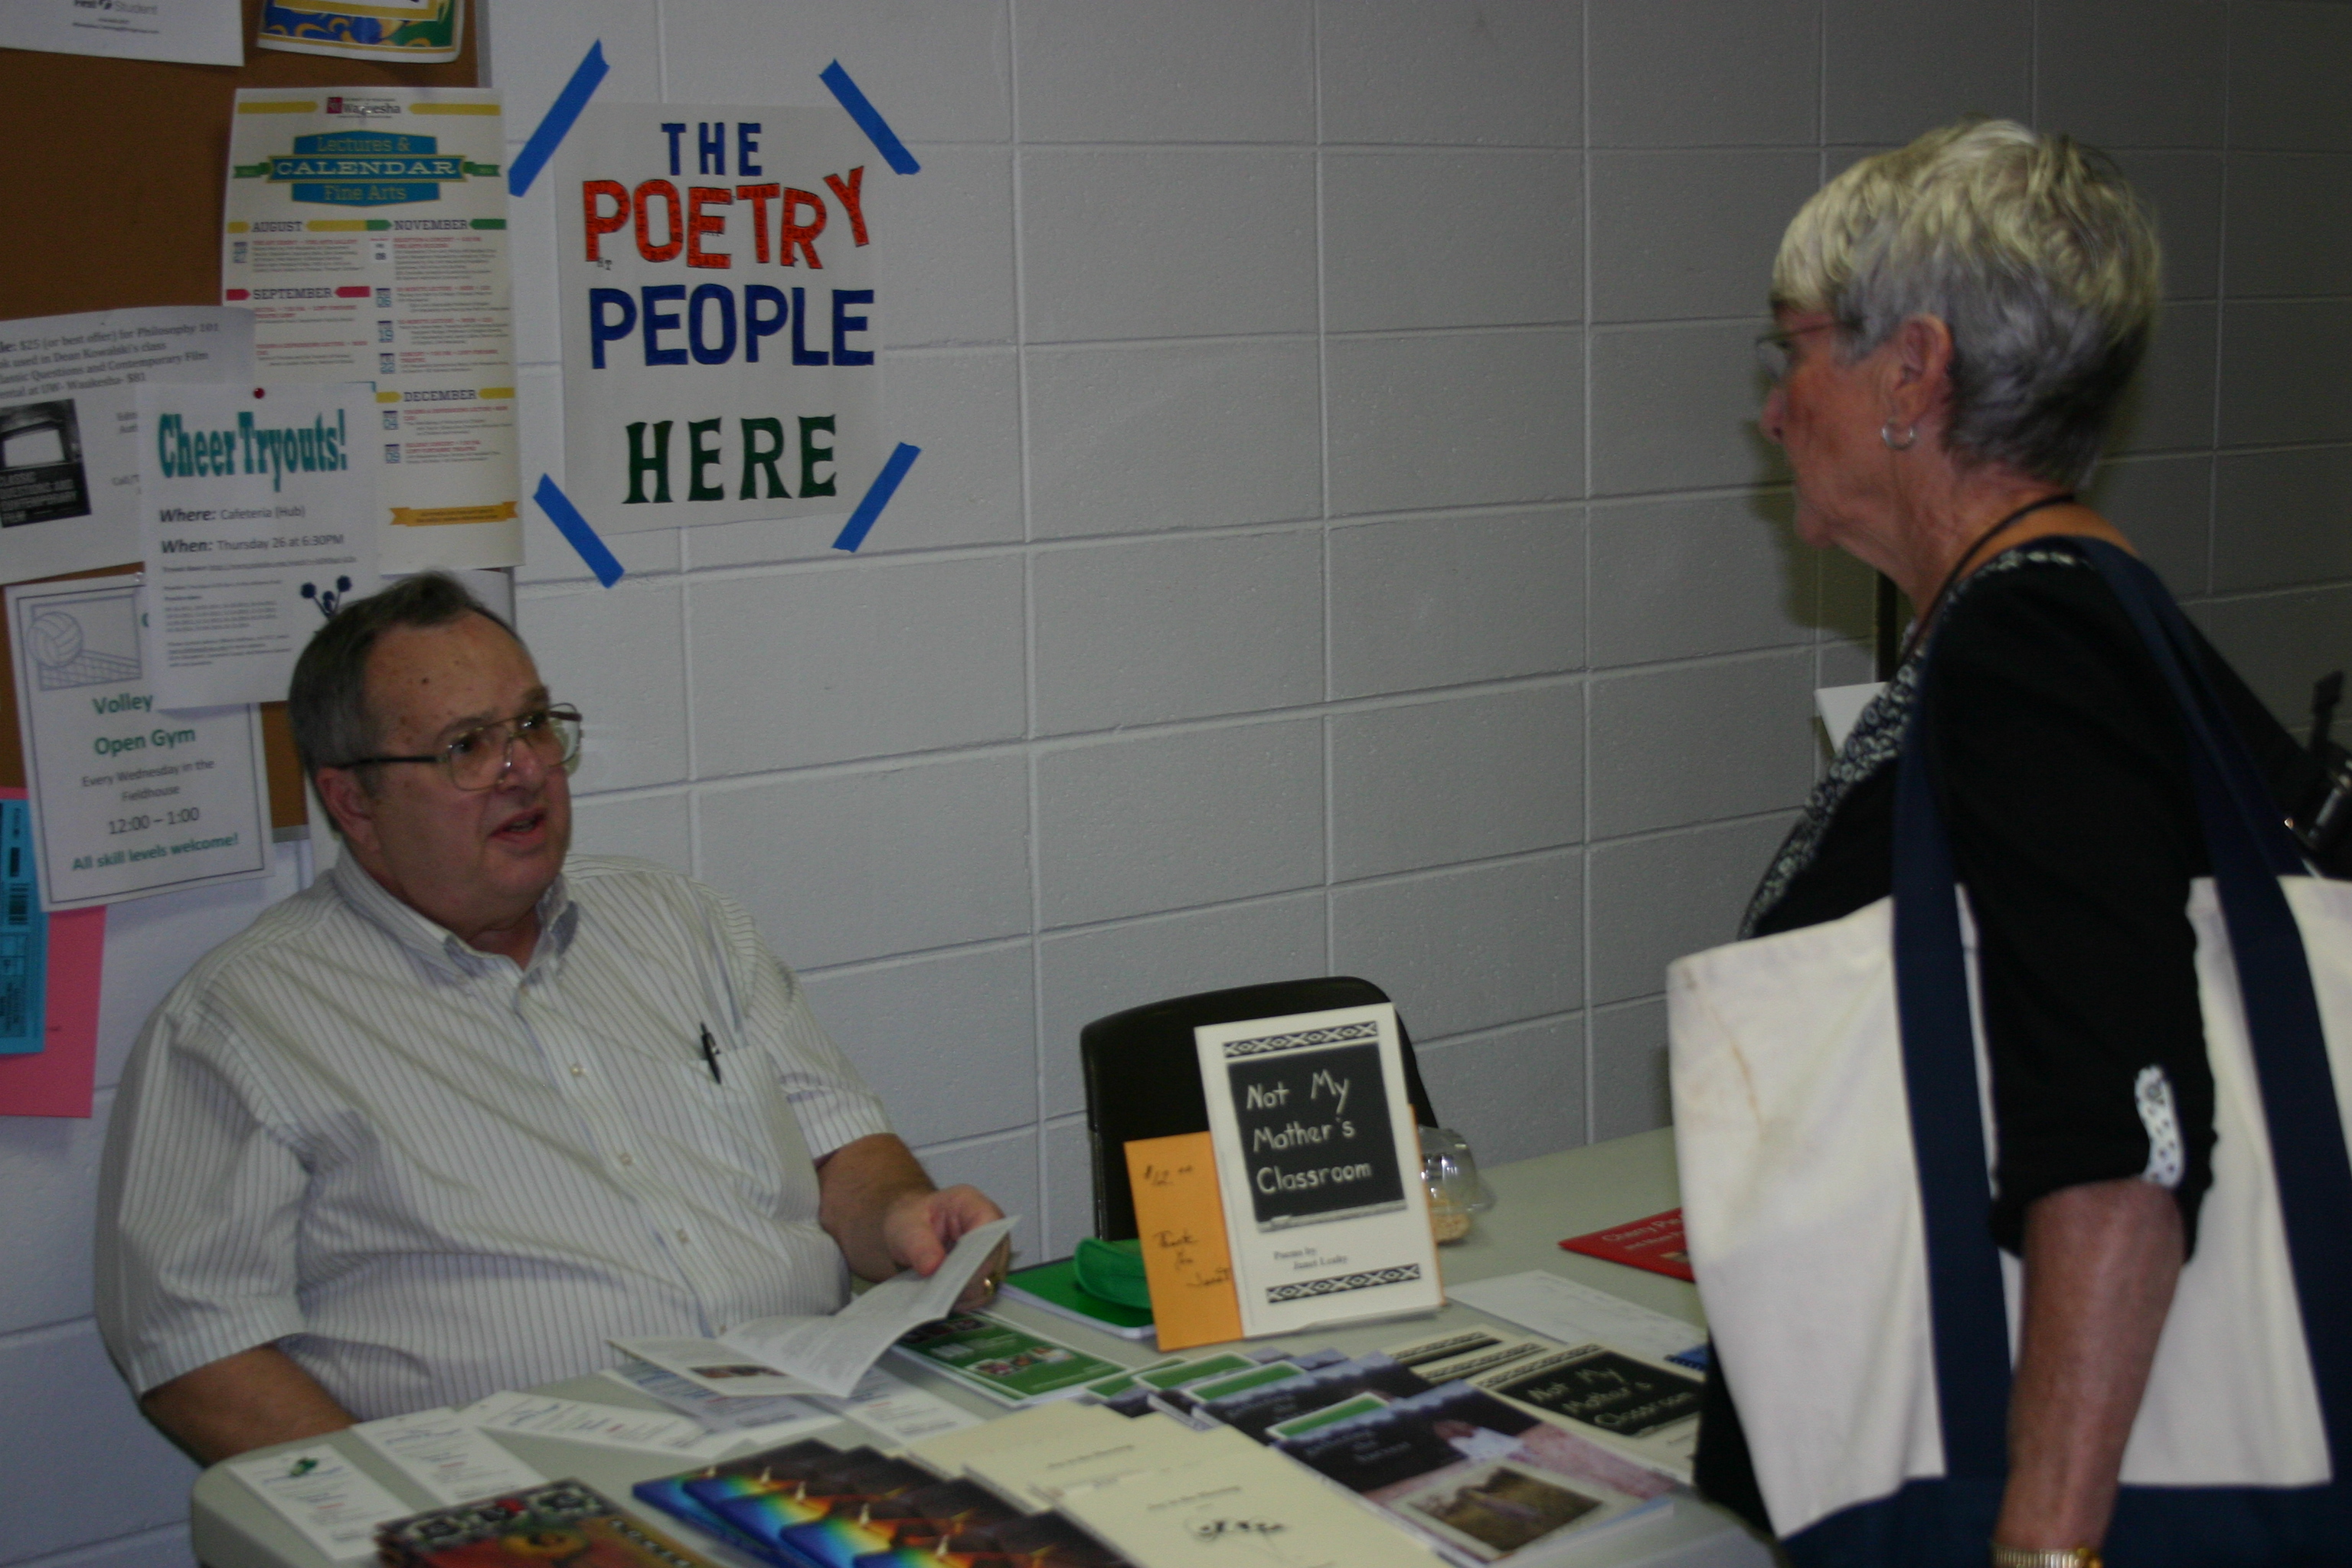 Exhibitors at the 2013 Festival of Books